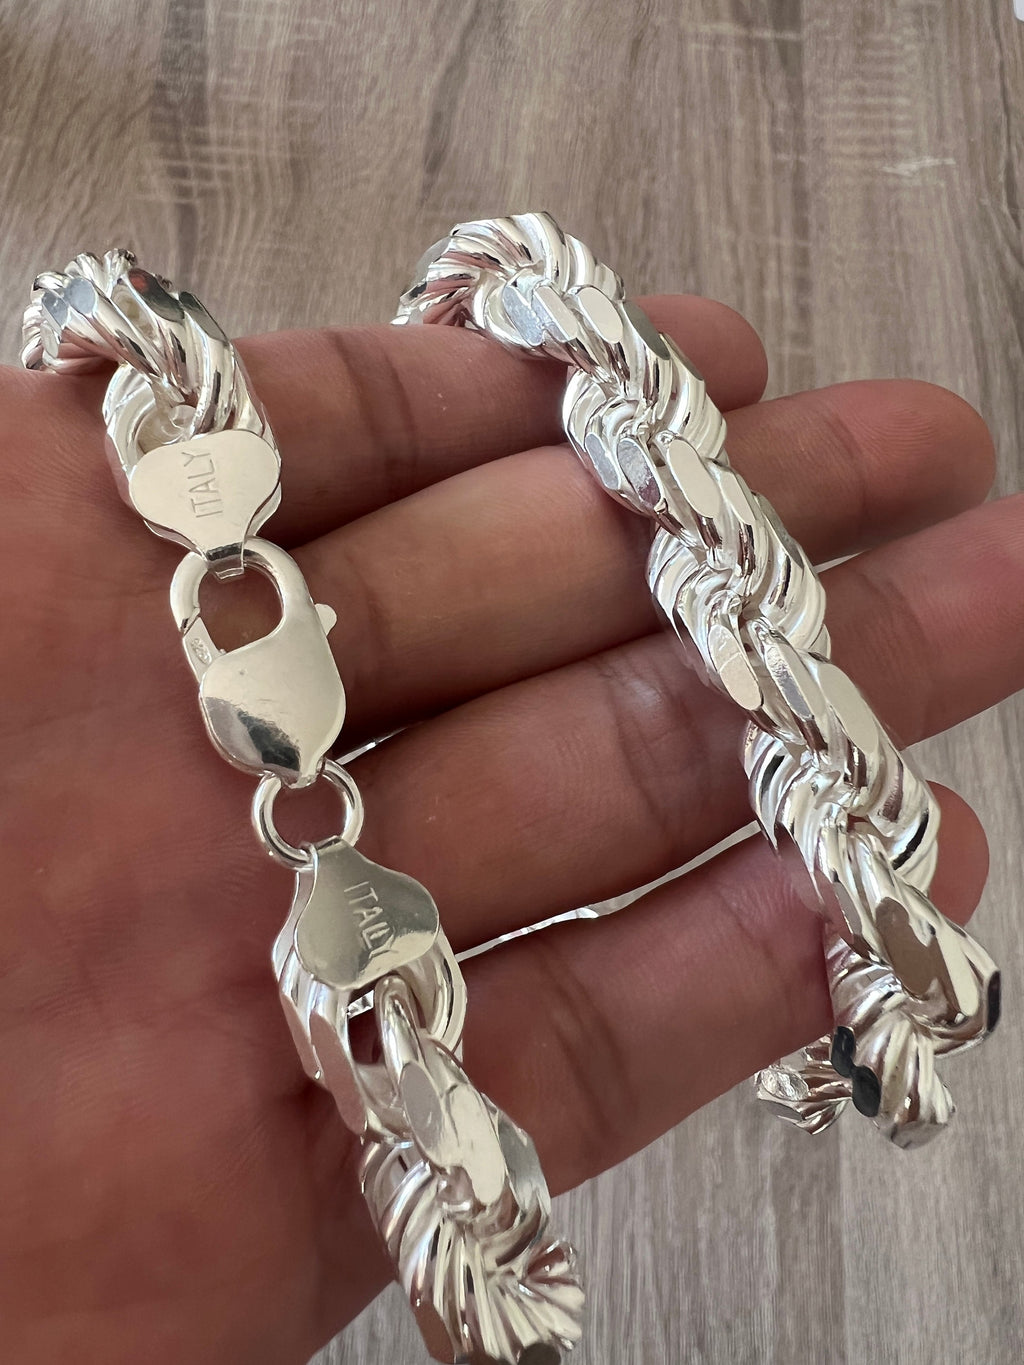 Diamond Cut Rope Chain Bracelet (4mm) in 14k Gold, Made in Italy